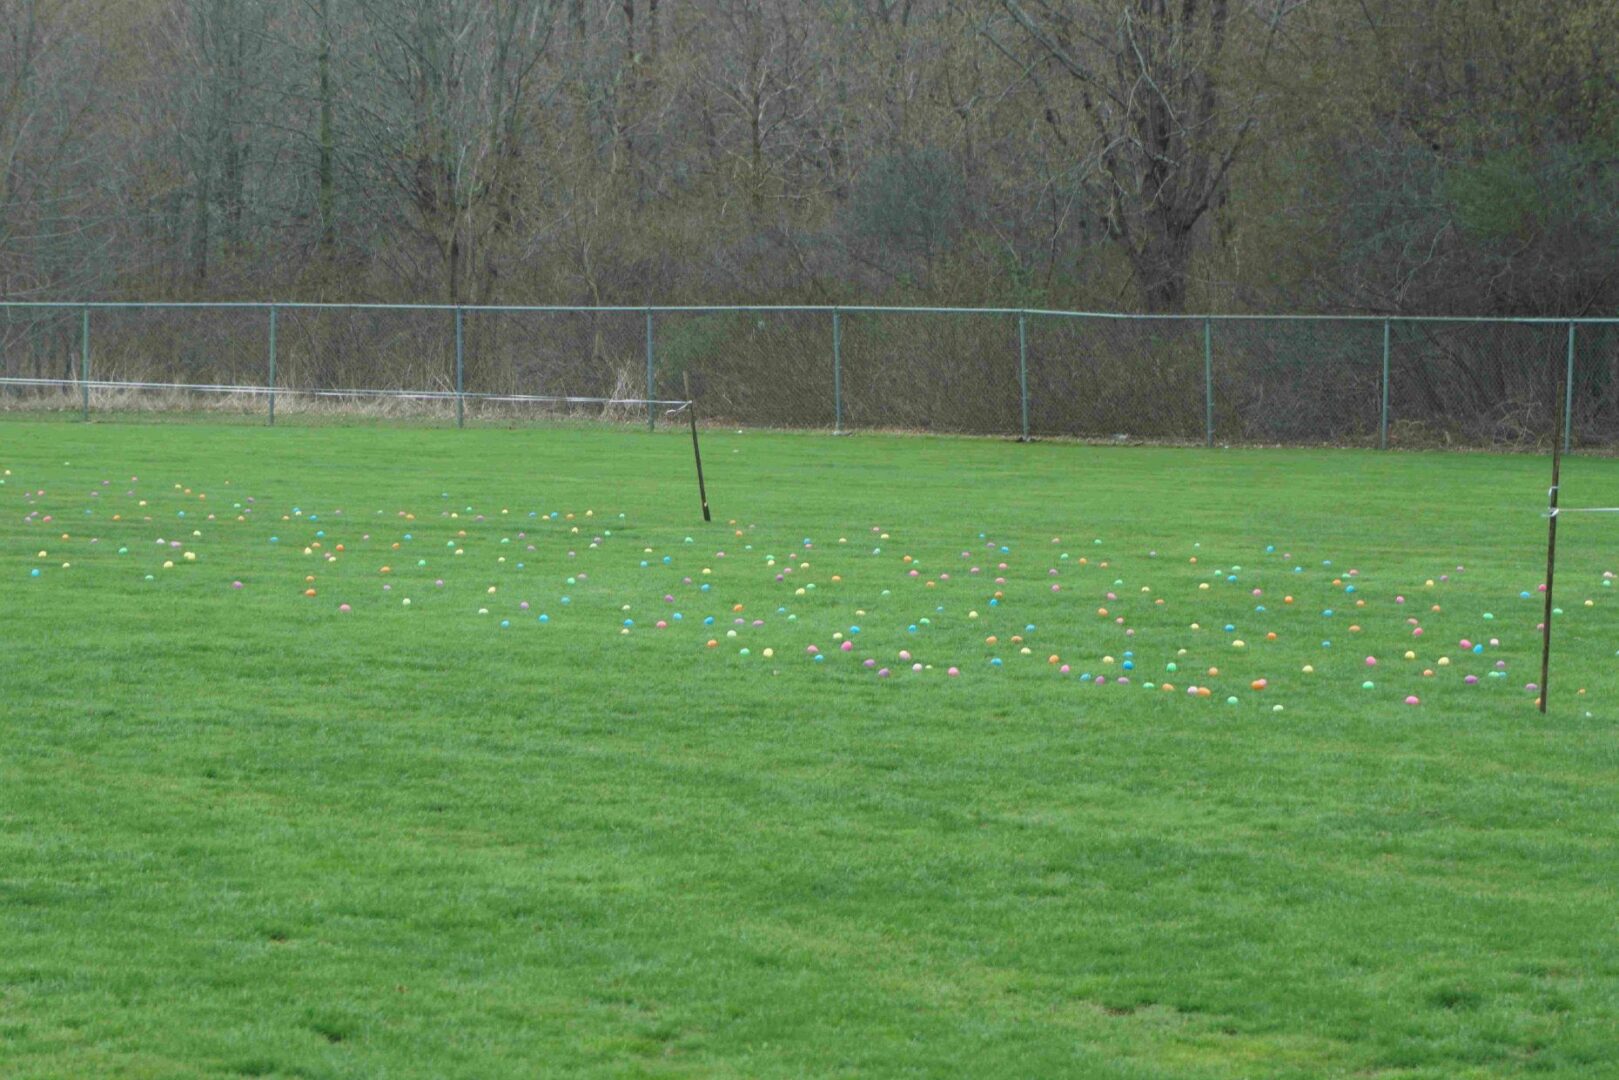 A field with colorful eggs